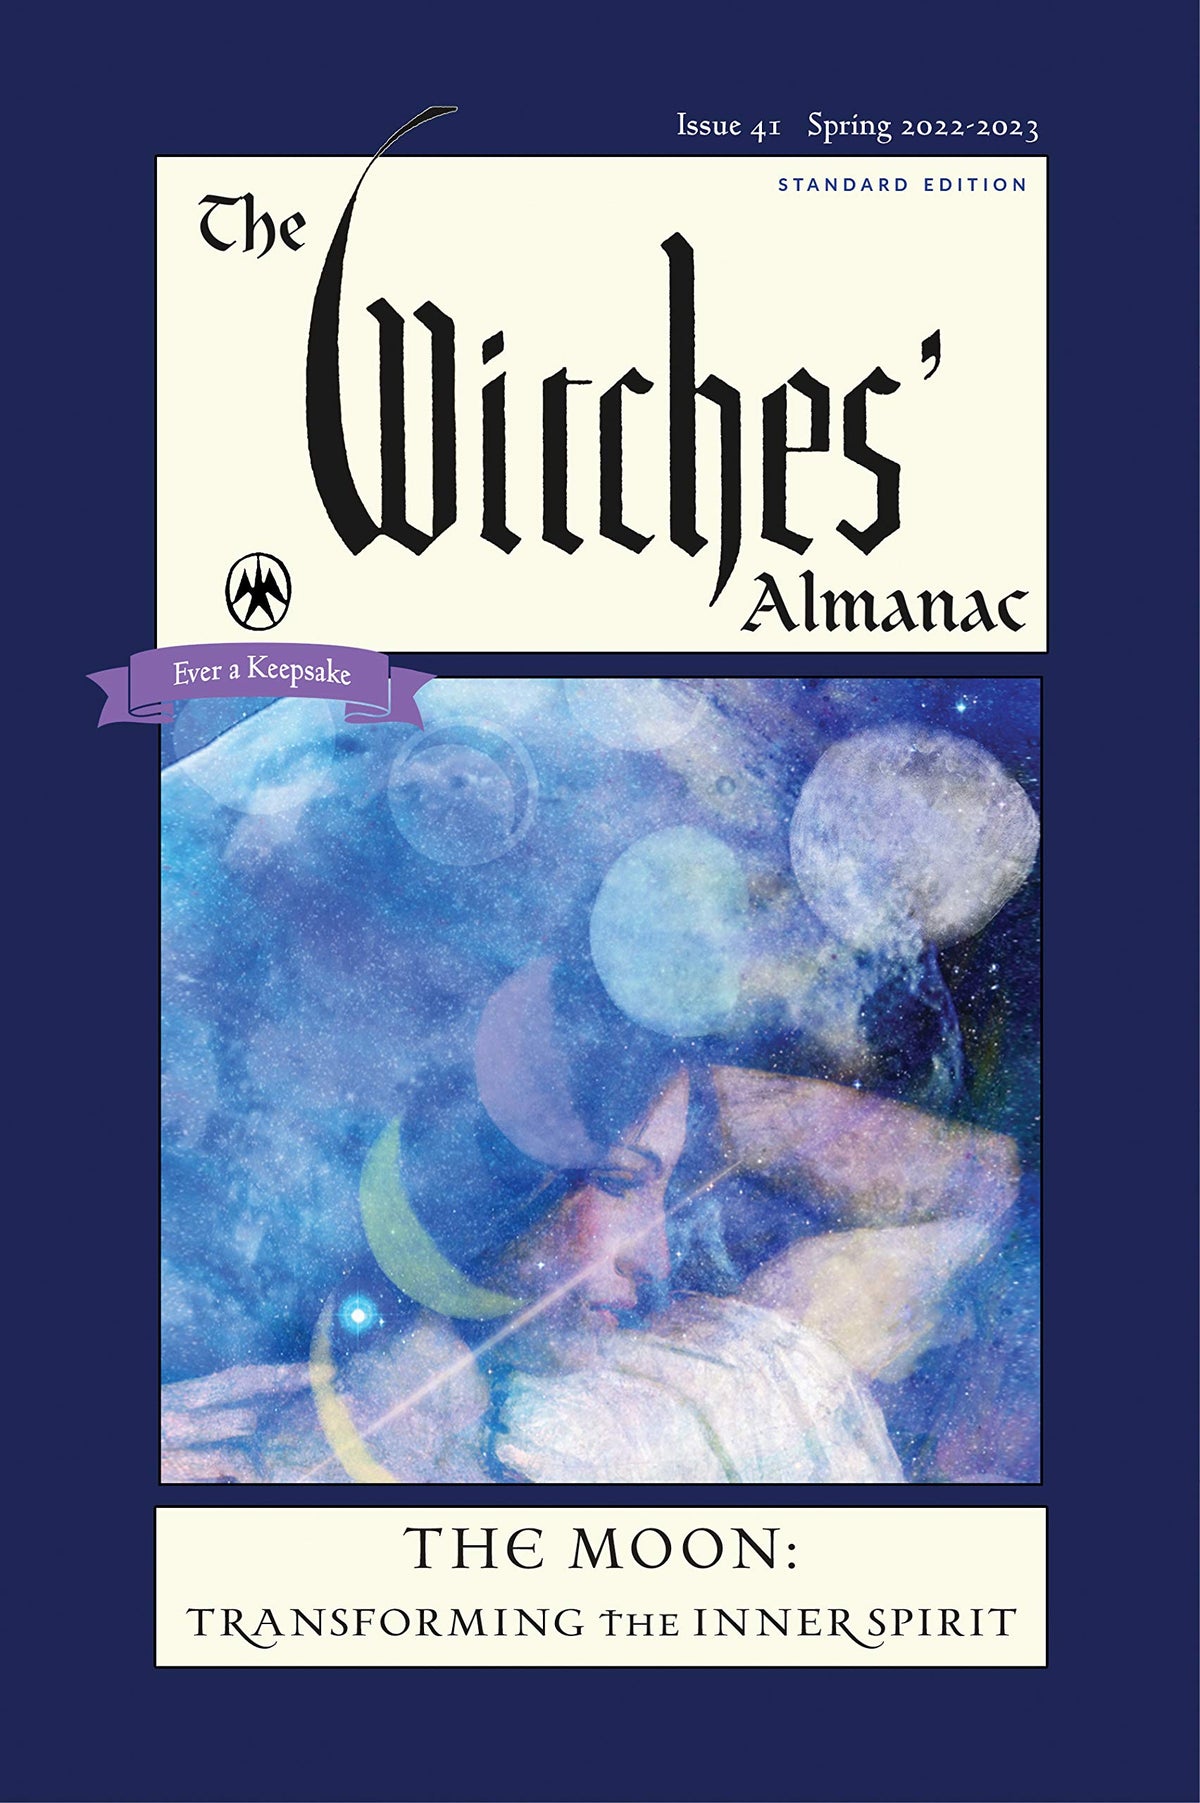 The Witches&#39; Almanac 2022-2023 Standard Edition Issue 41: The Moon ― Transforming the Inner Spirit